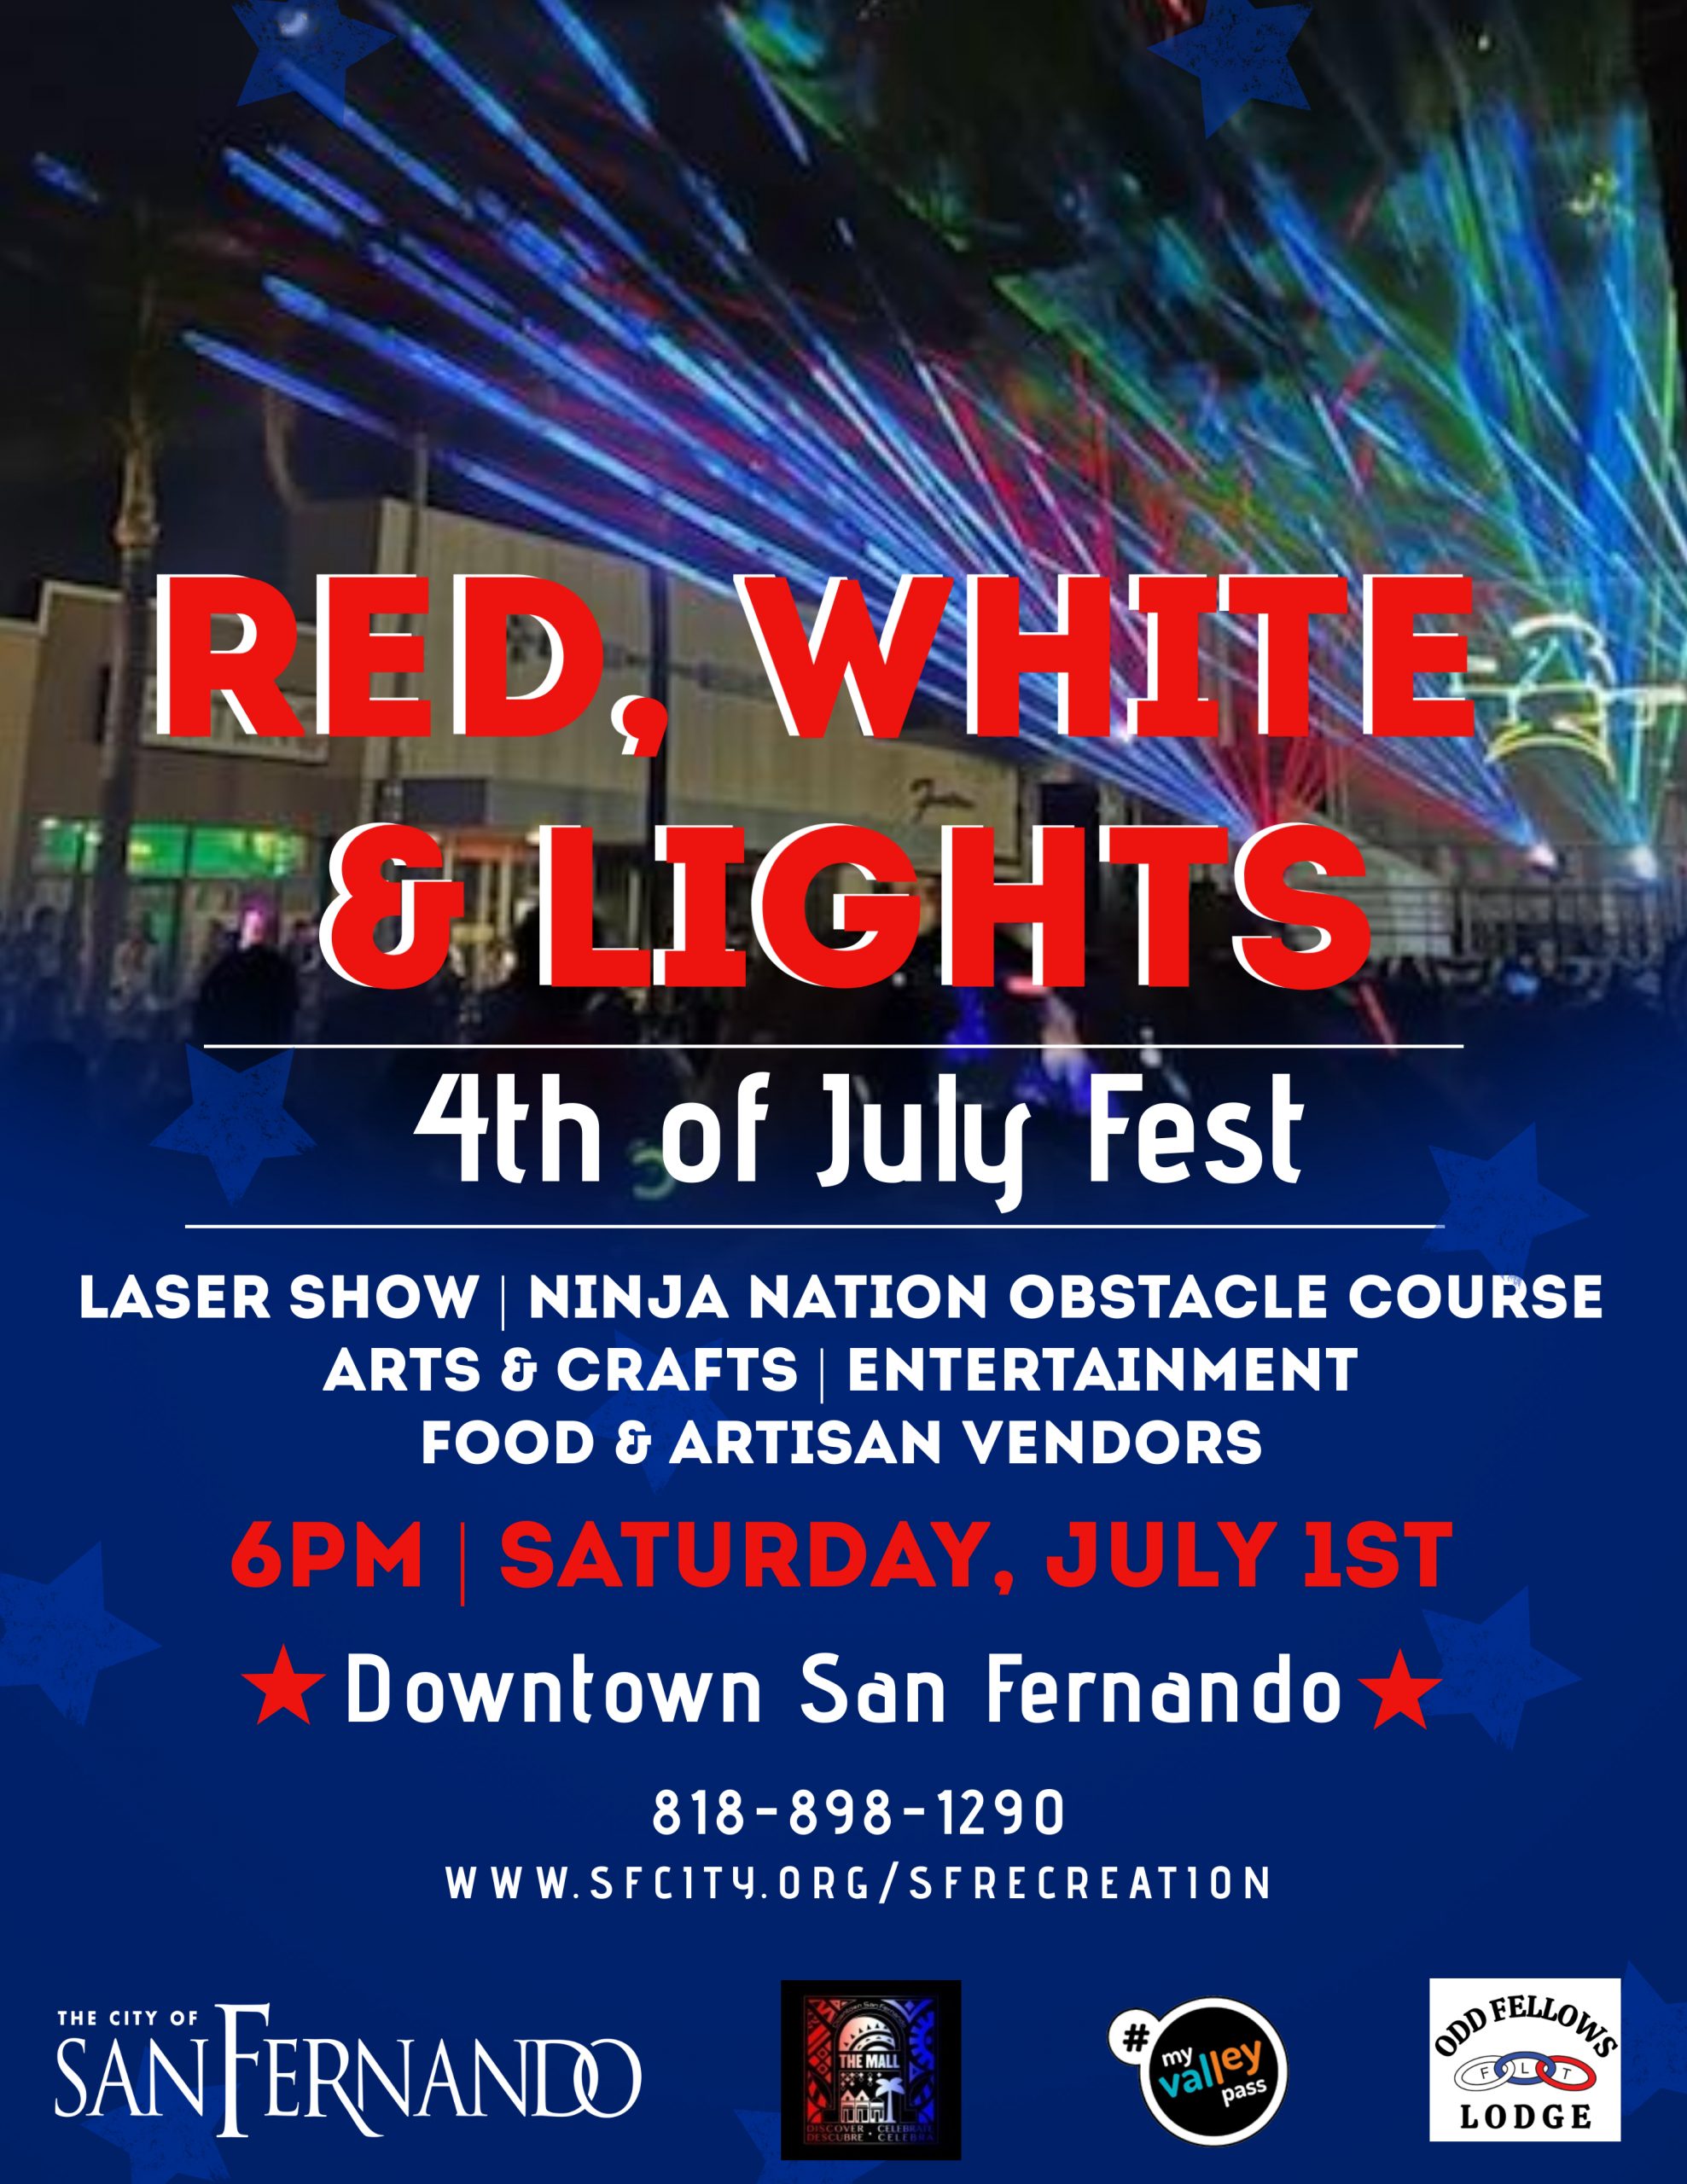 Red White & Lights July 4th Fest Event 23